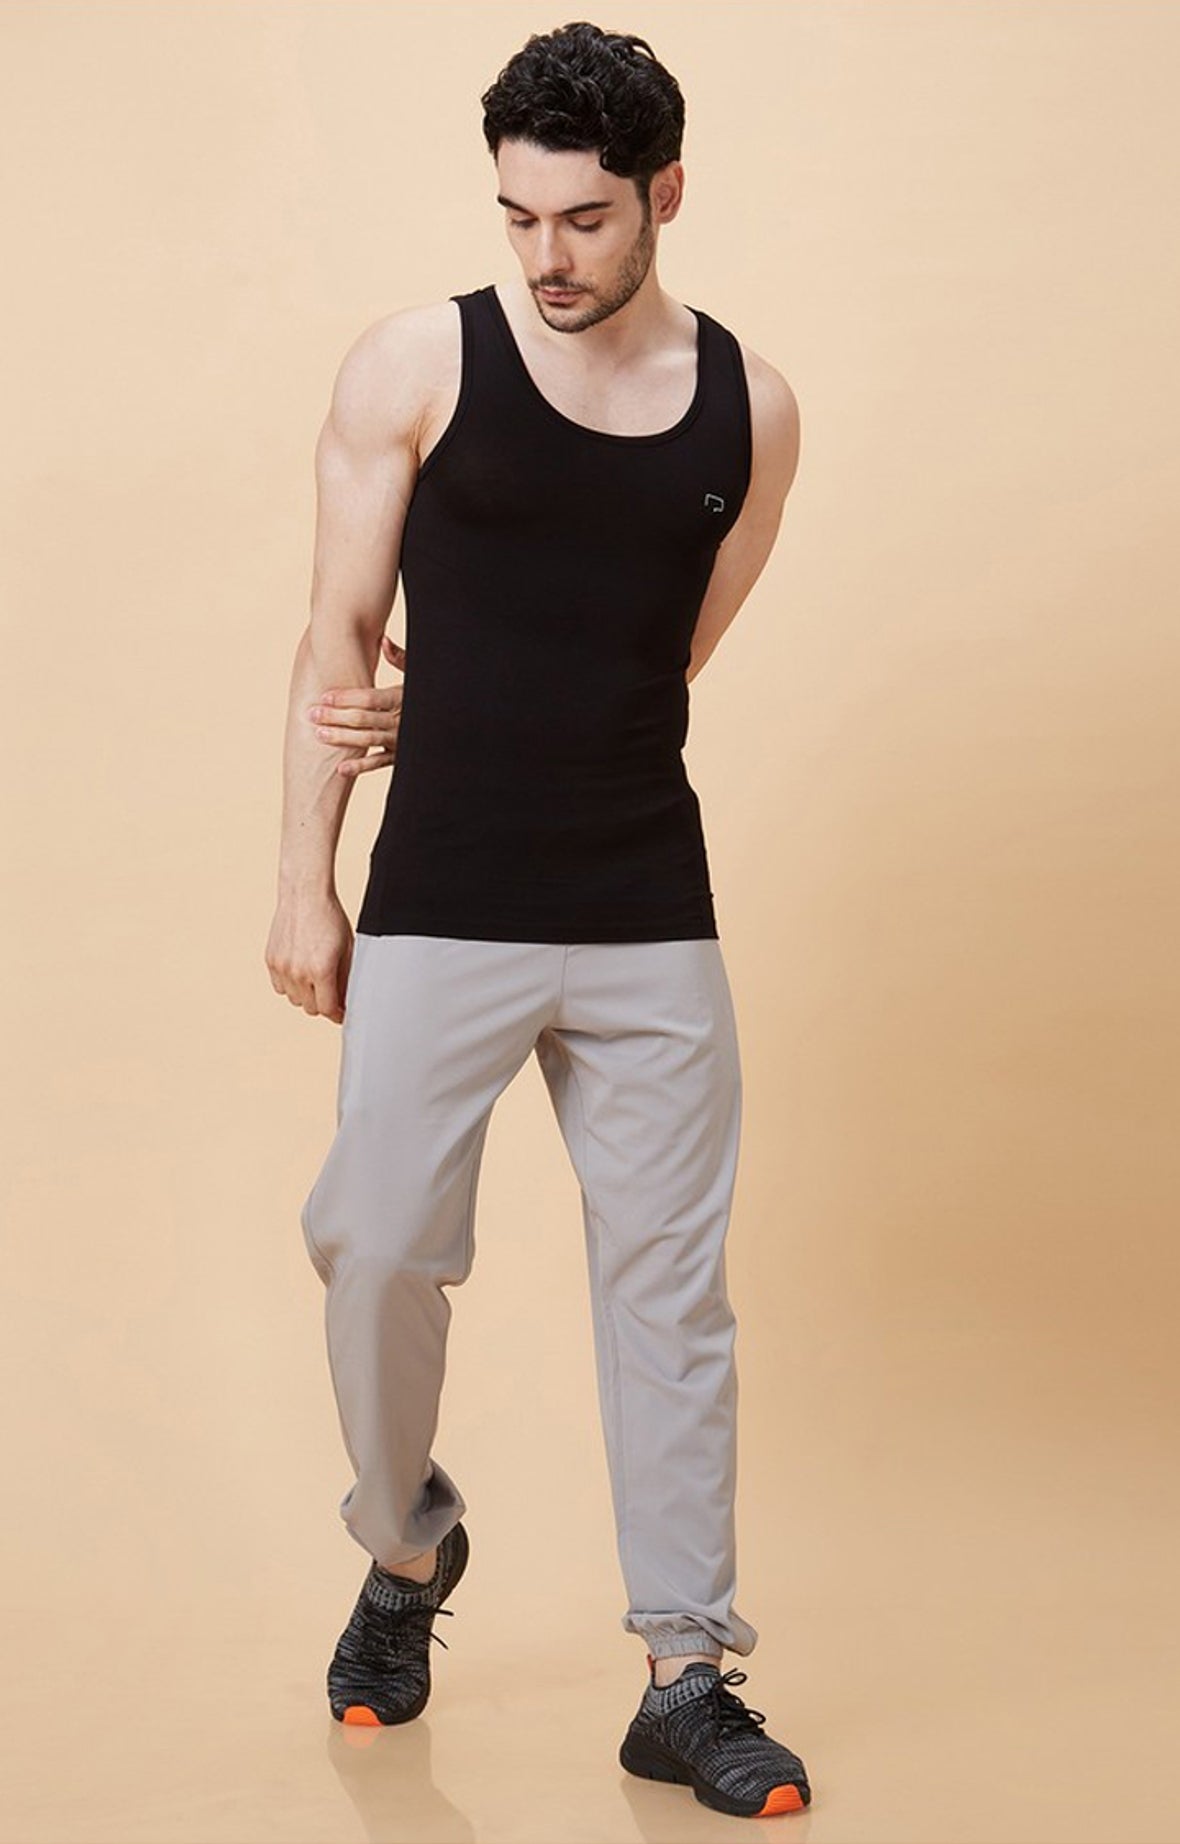 SALE - Mens Roses Spandex Bra Top with Frilled Pico Elastic Trim Male